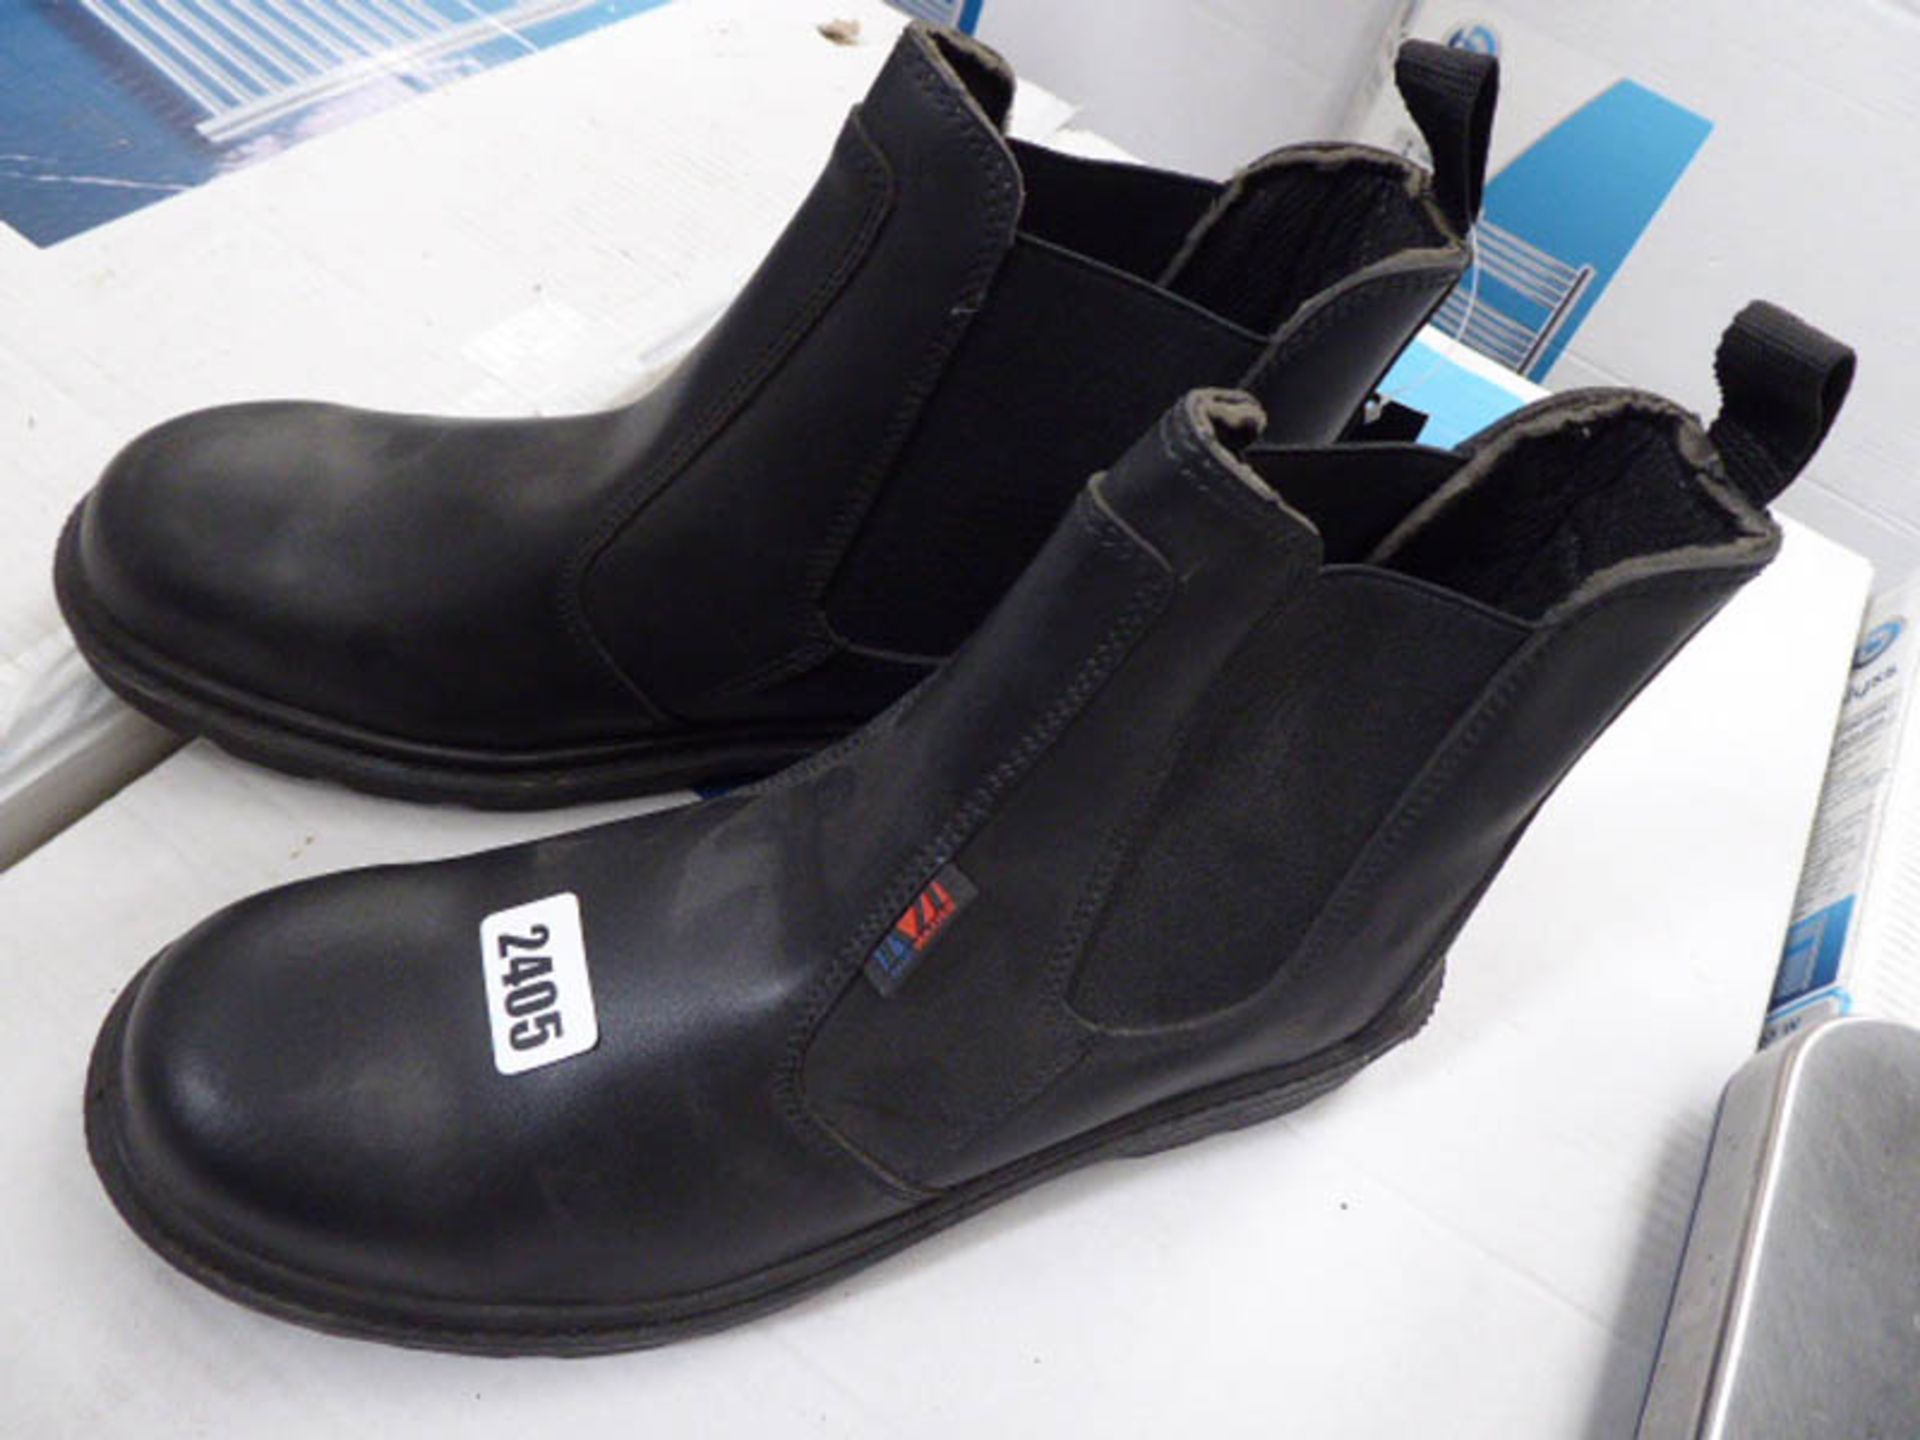 Pair of Slip Master size 11 safety boots in black